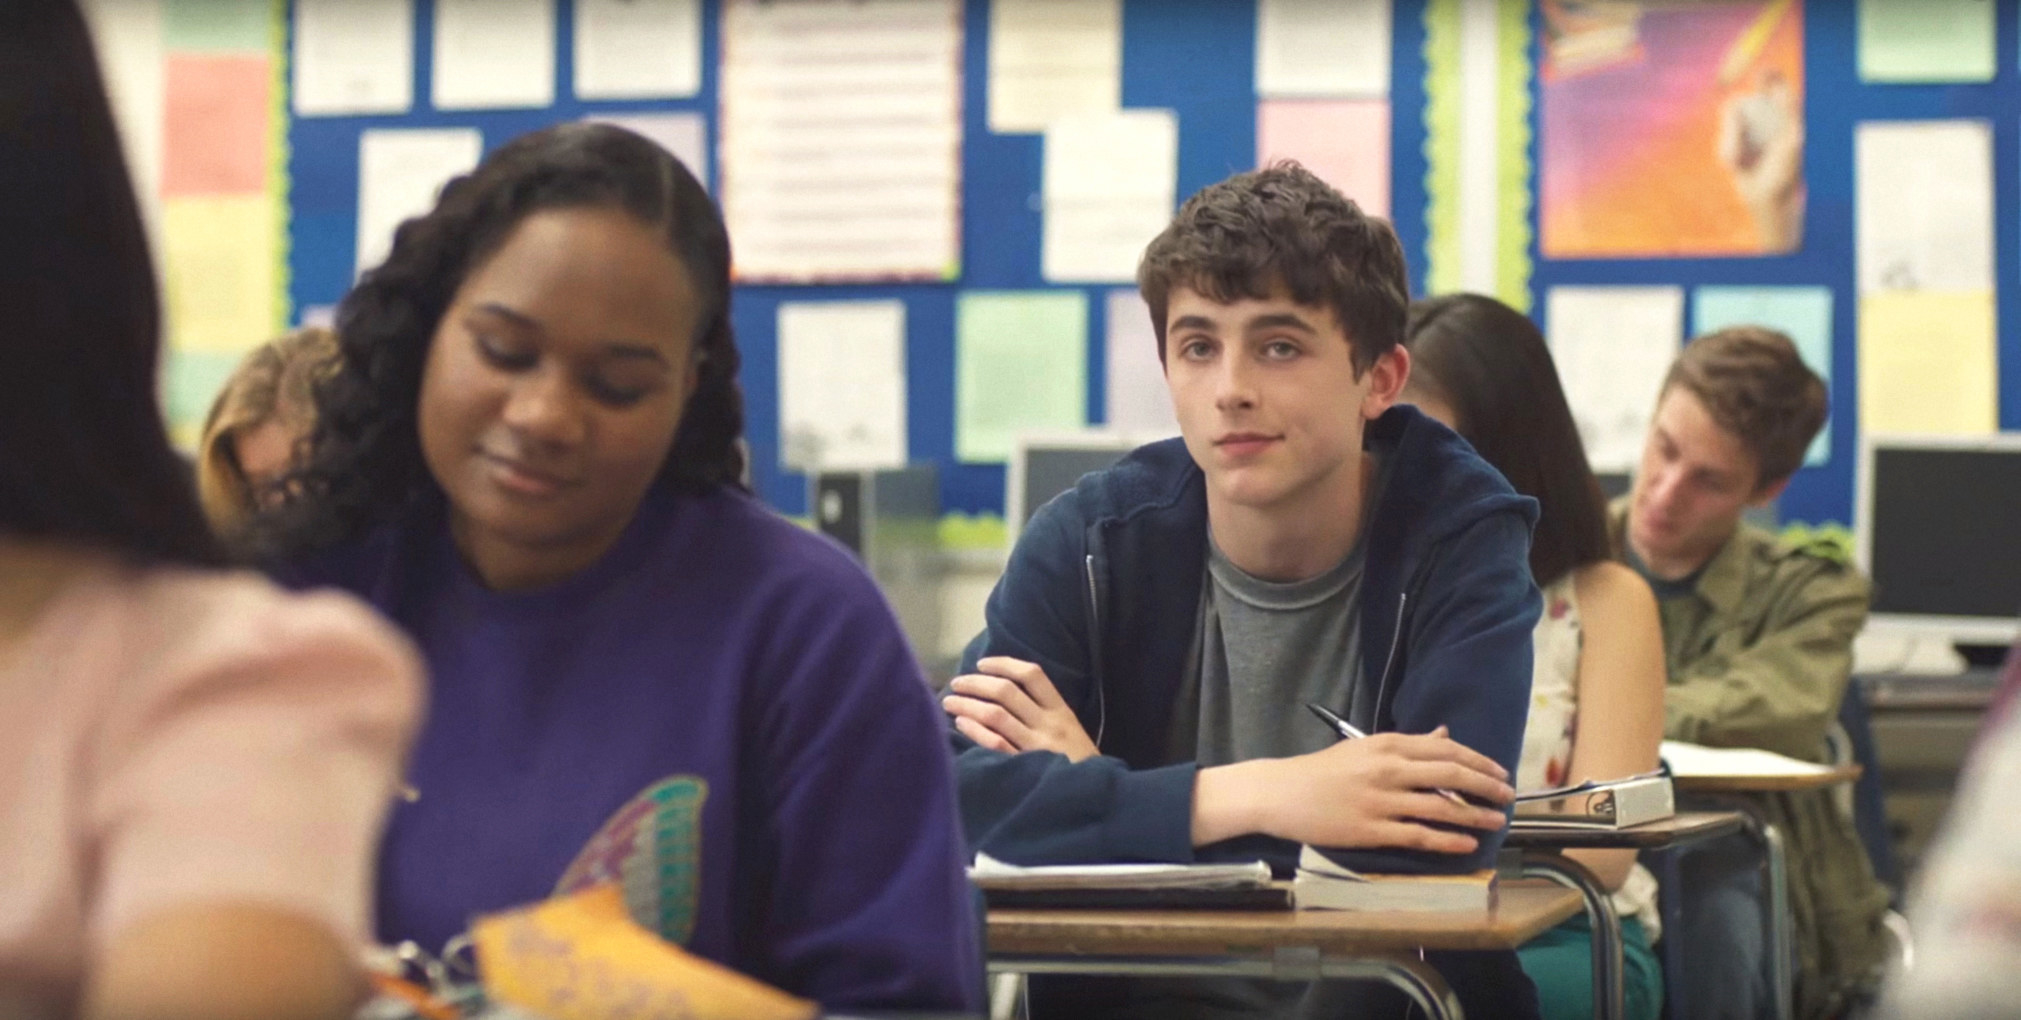 Timothee Chalamet sitting at his desk in a classroom among other students